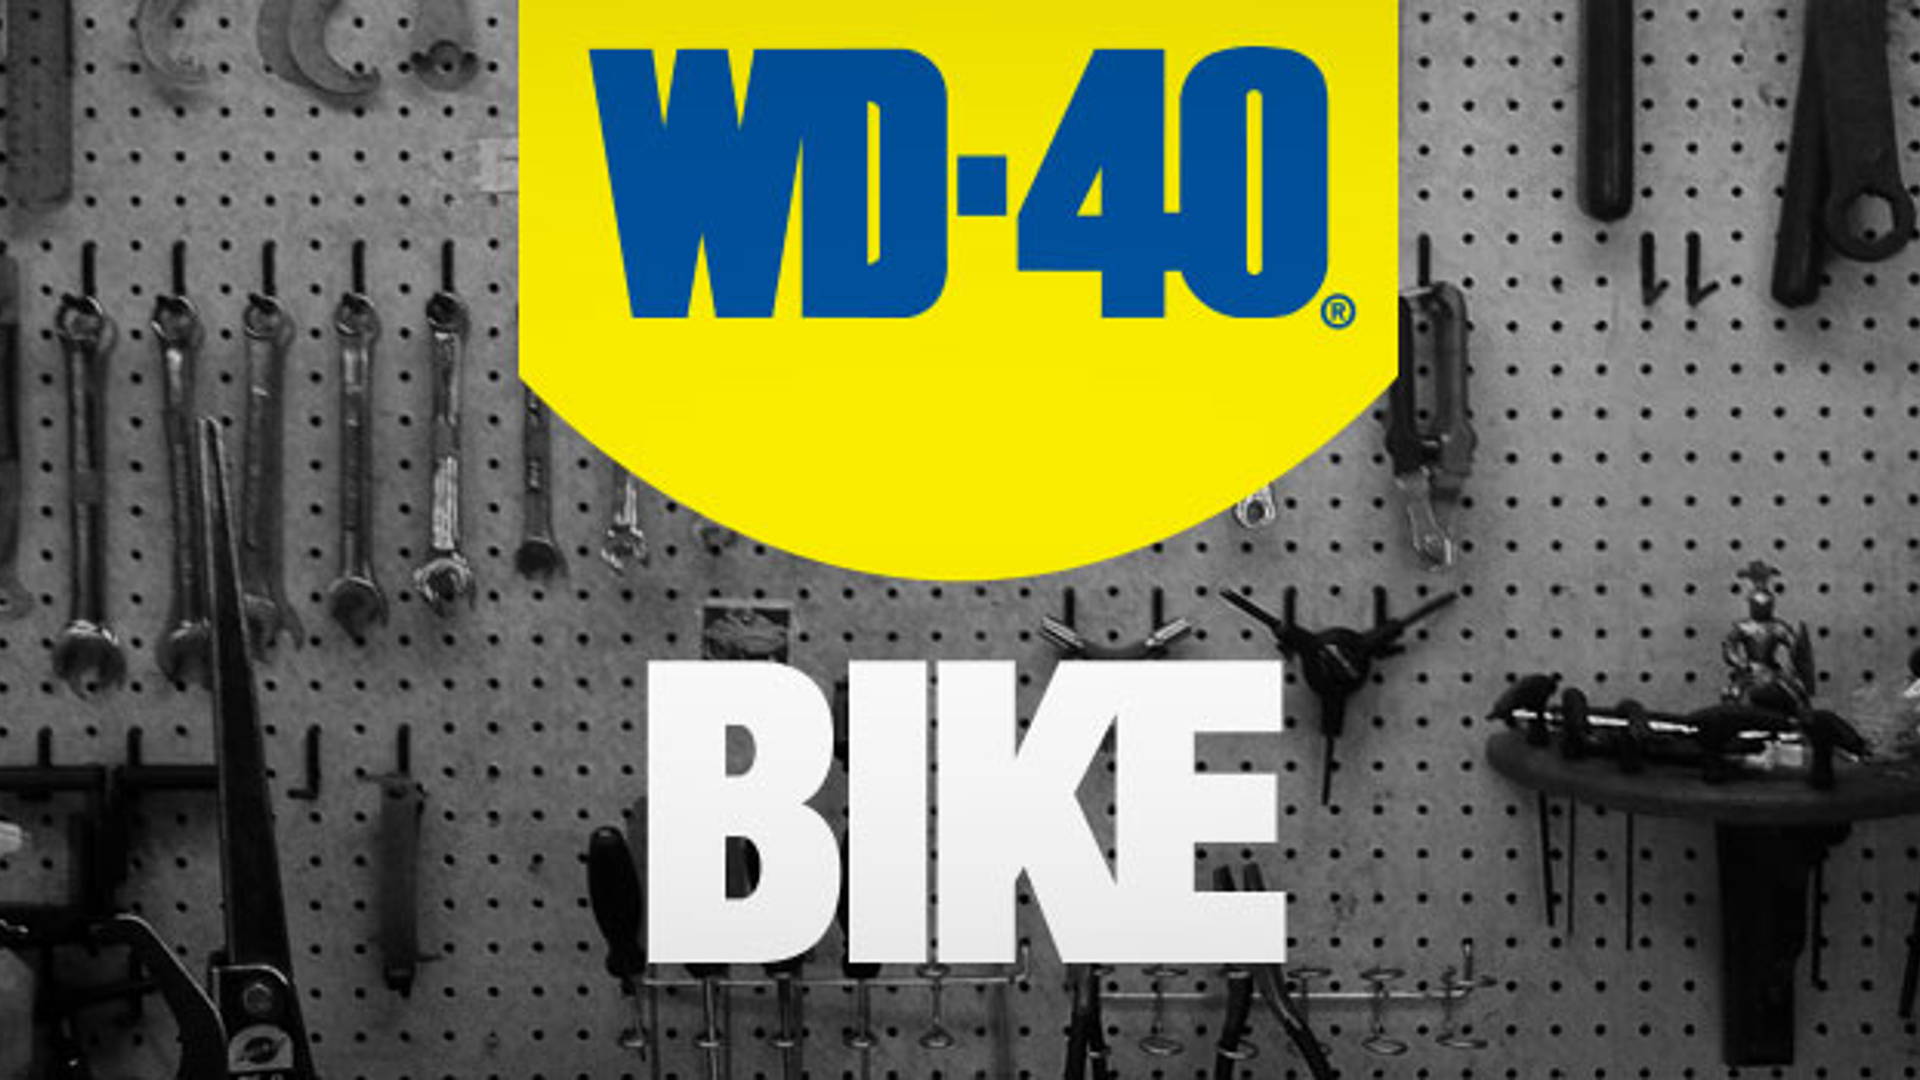 Featured image for WD-40 Bike